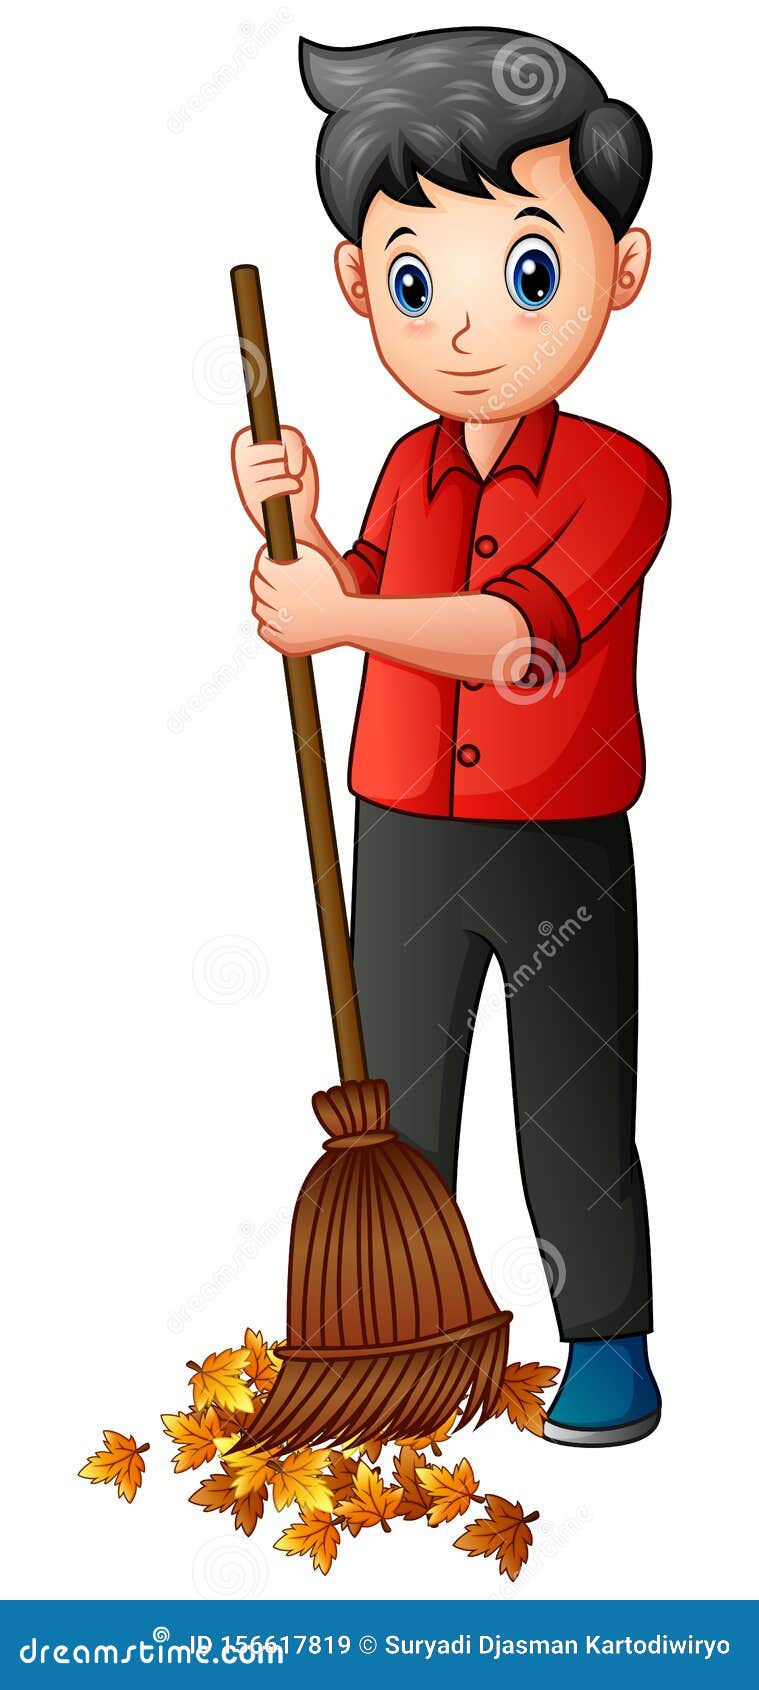 Man with a Broom Sweeps Away Fallen Leaves Stock Vector - Illustration ...